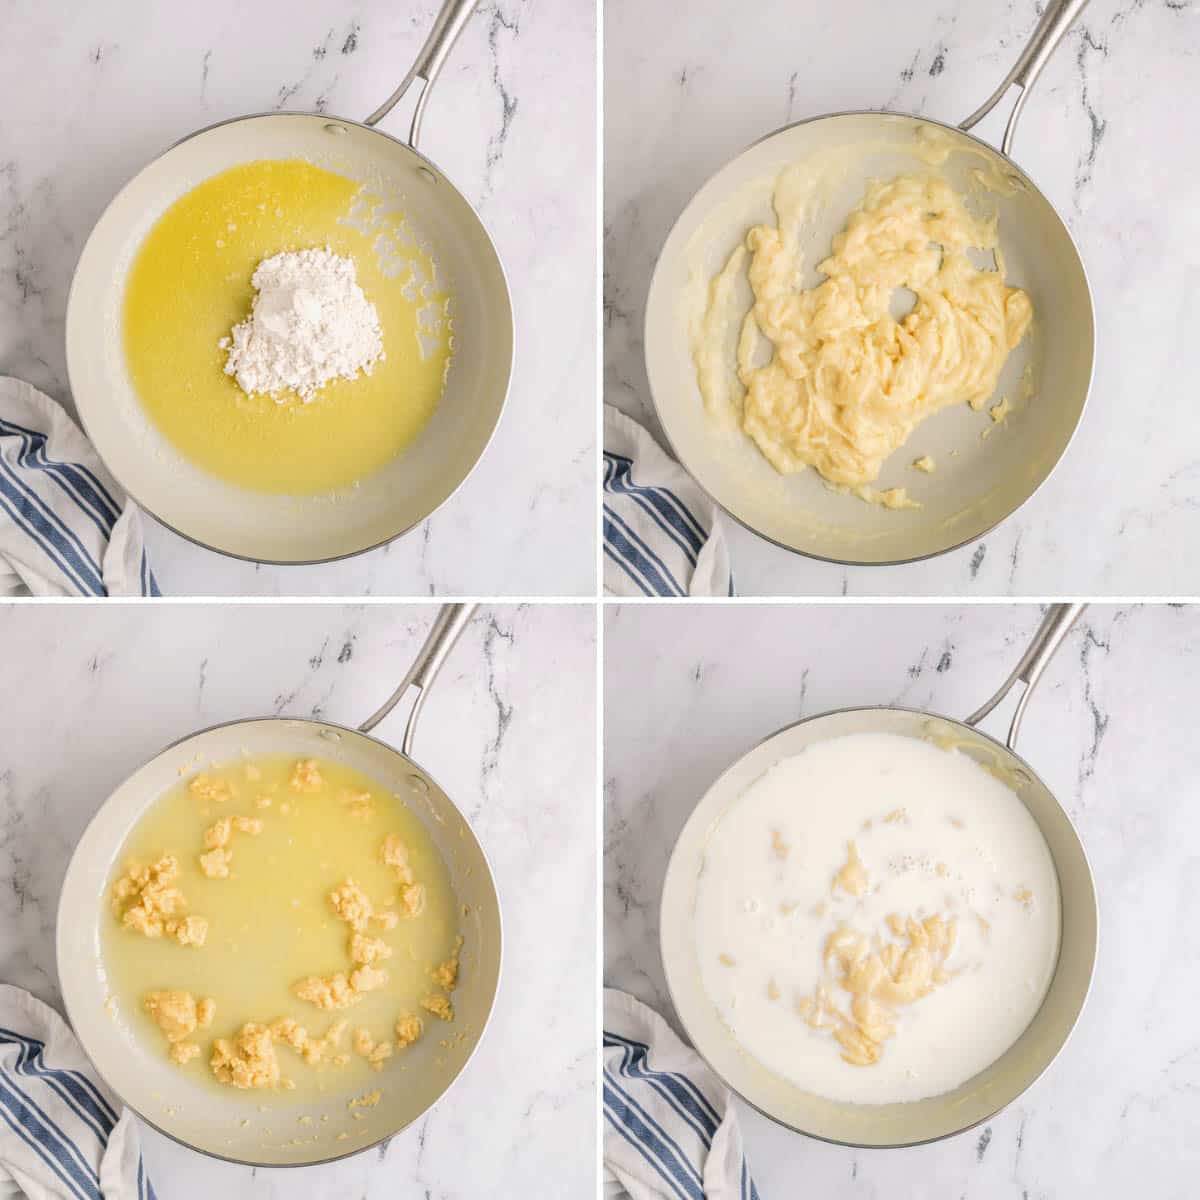 Four ingredients showing the process of creating a creamy cheese sauce.